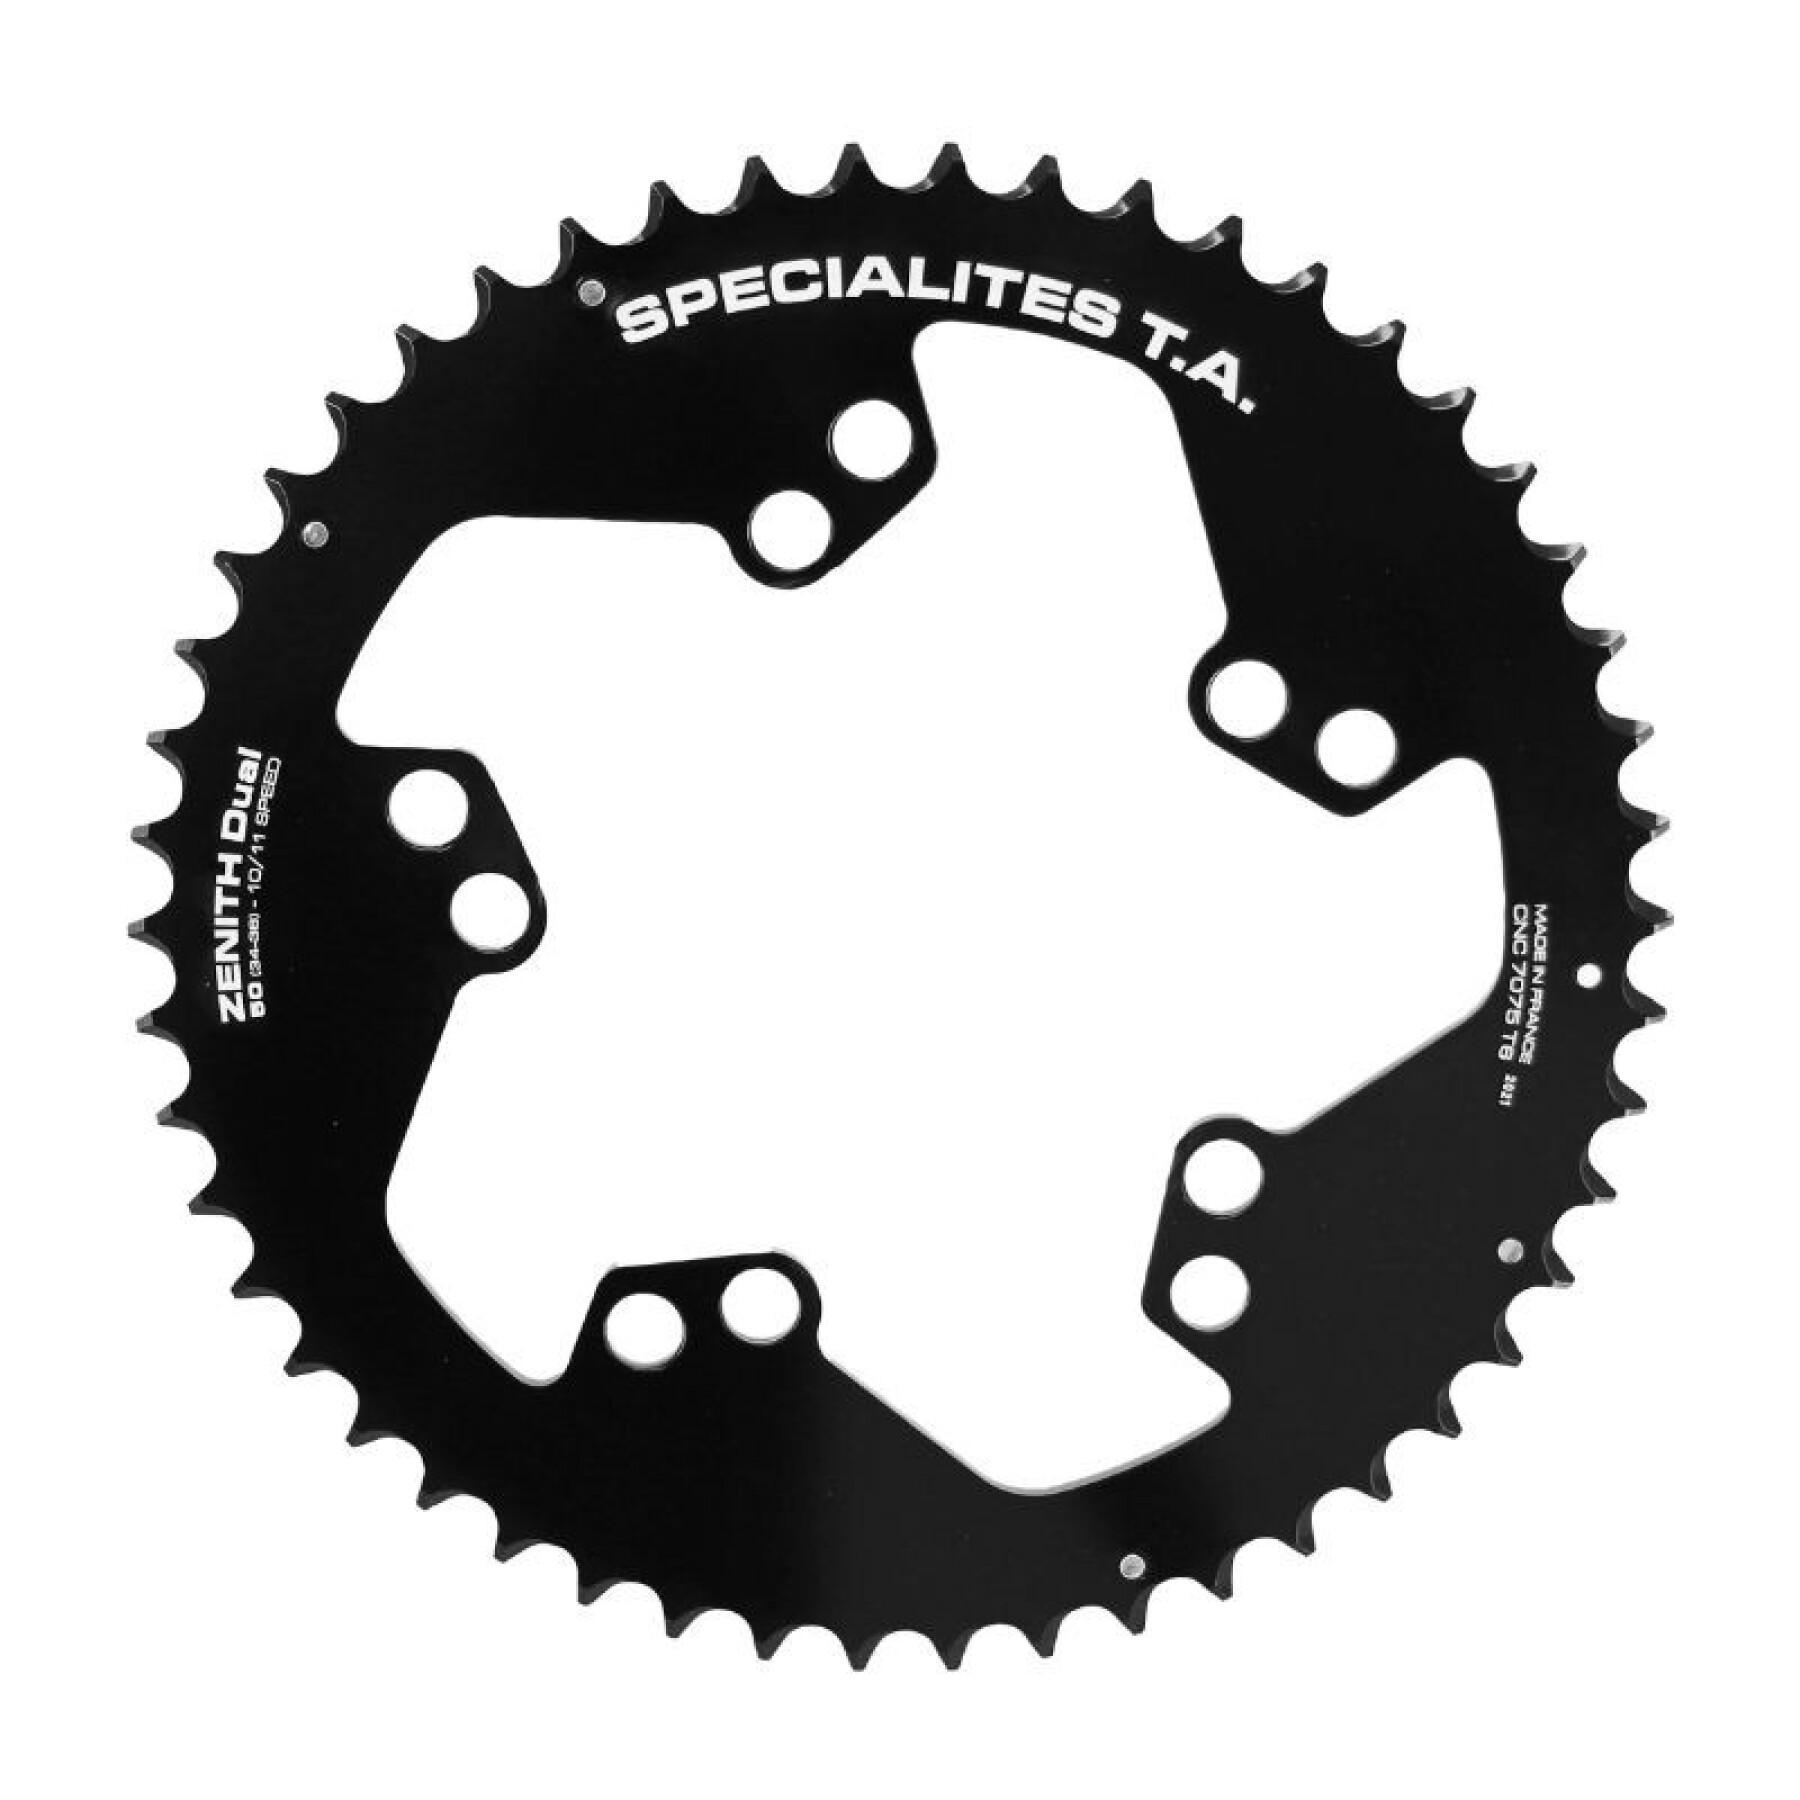 Road chainring for crankset specialties t.a. 5bra-130 look zed 7075 10-11v.